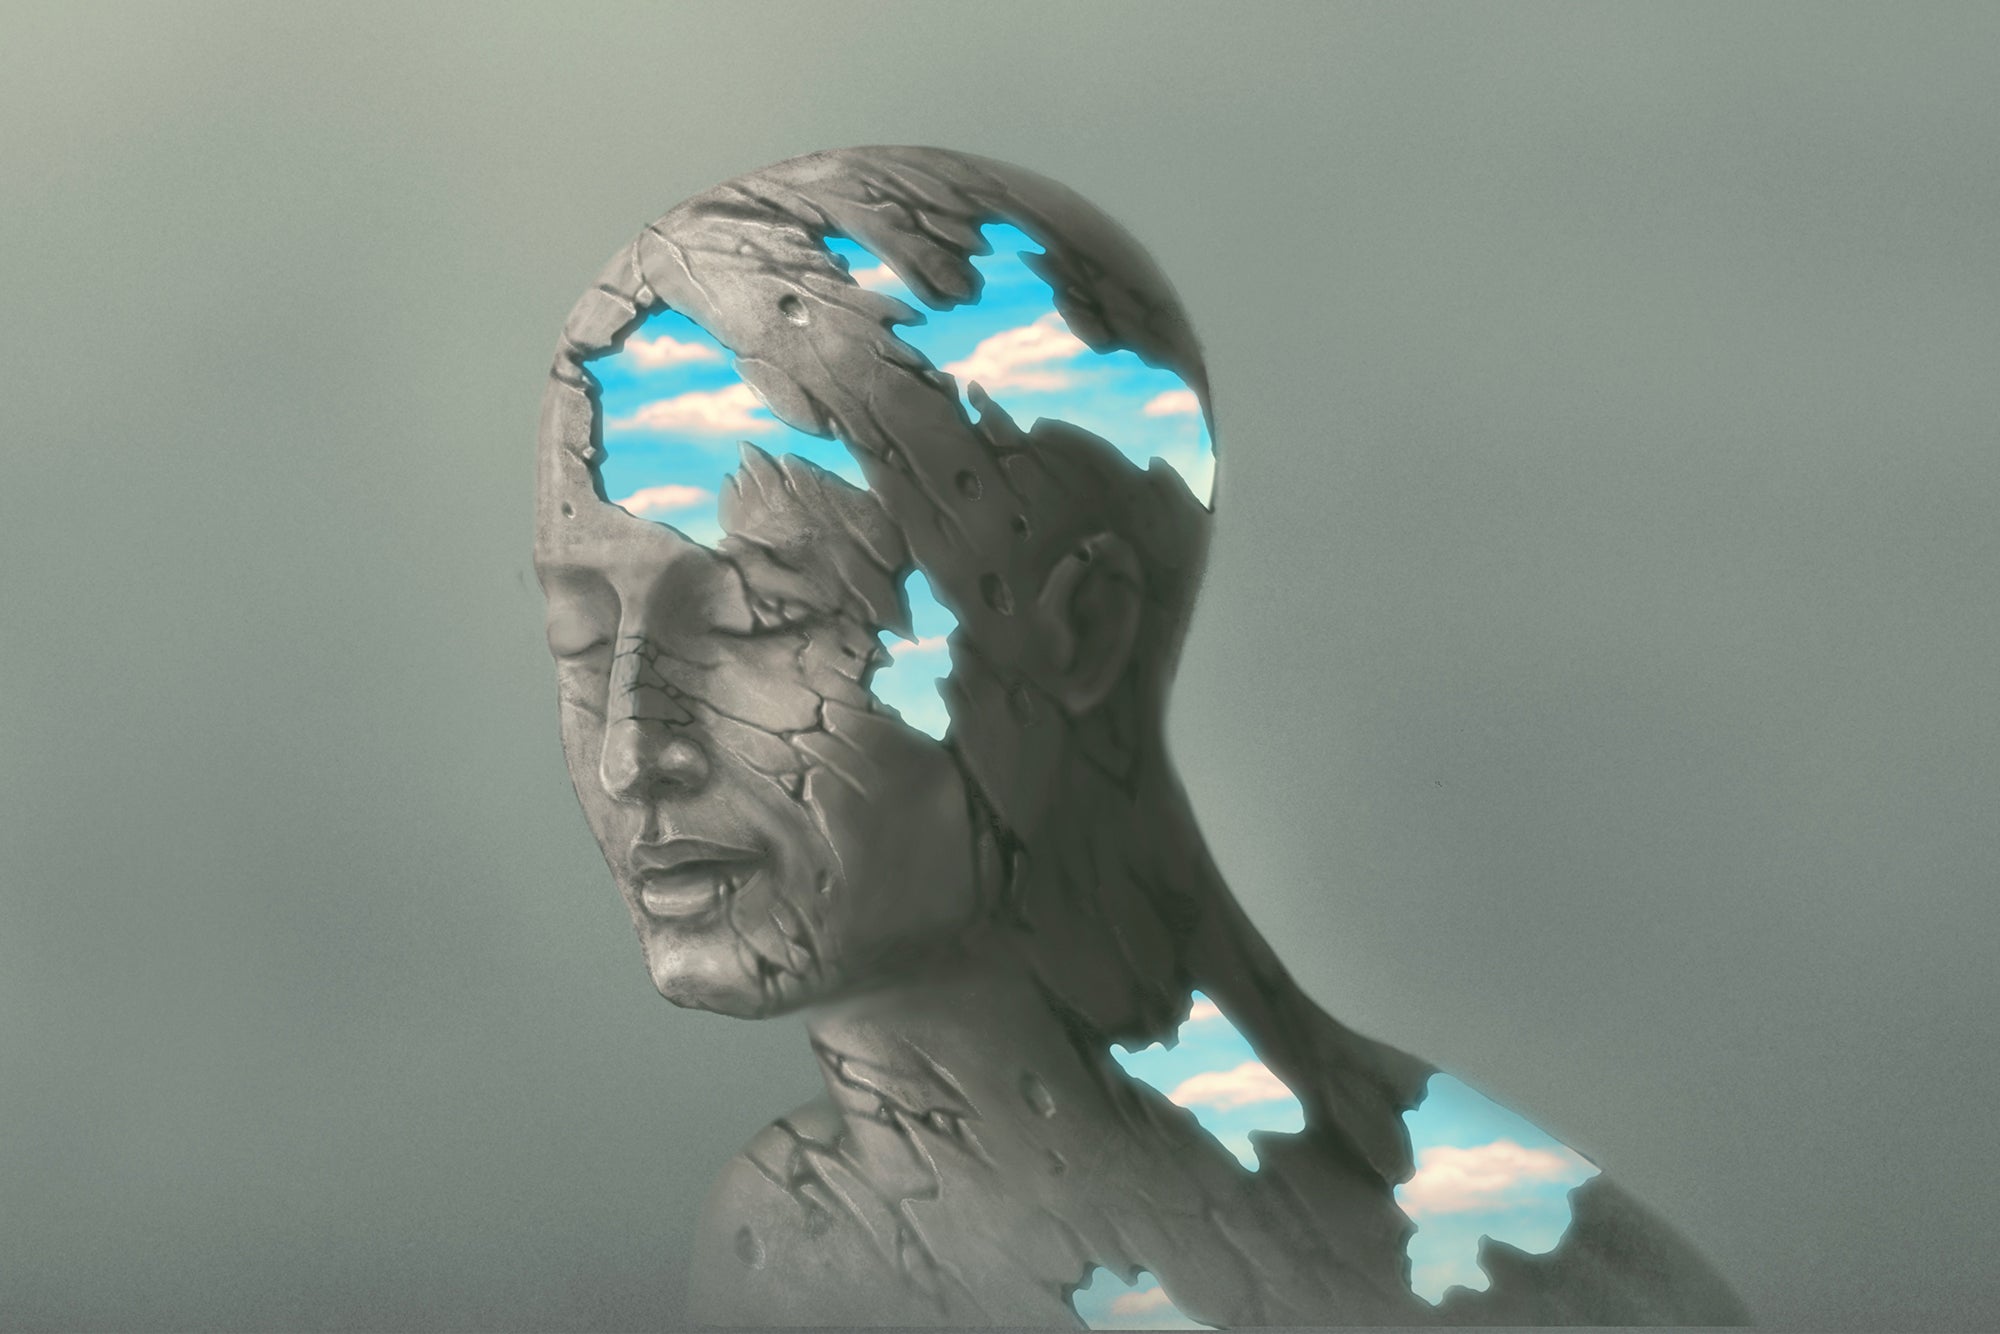 surreal painting, conceptual illustration of a human form, eyes closed, made of stone with pieces having fallen away from the surface revealing a blue sky with white clouds inside